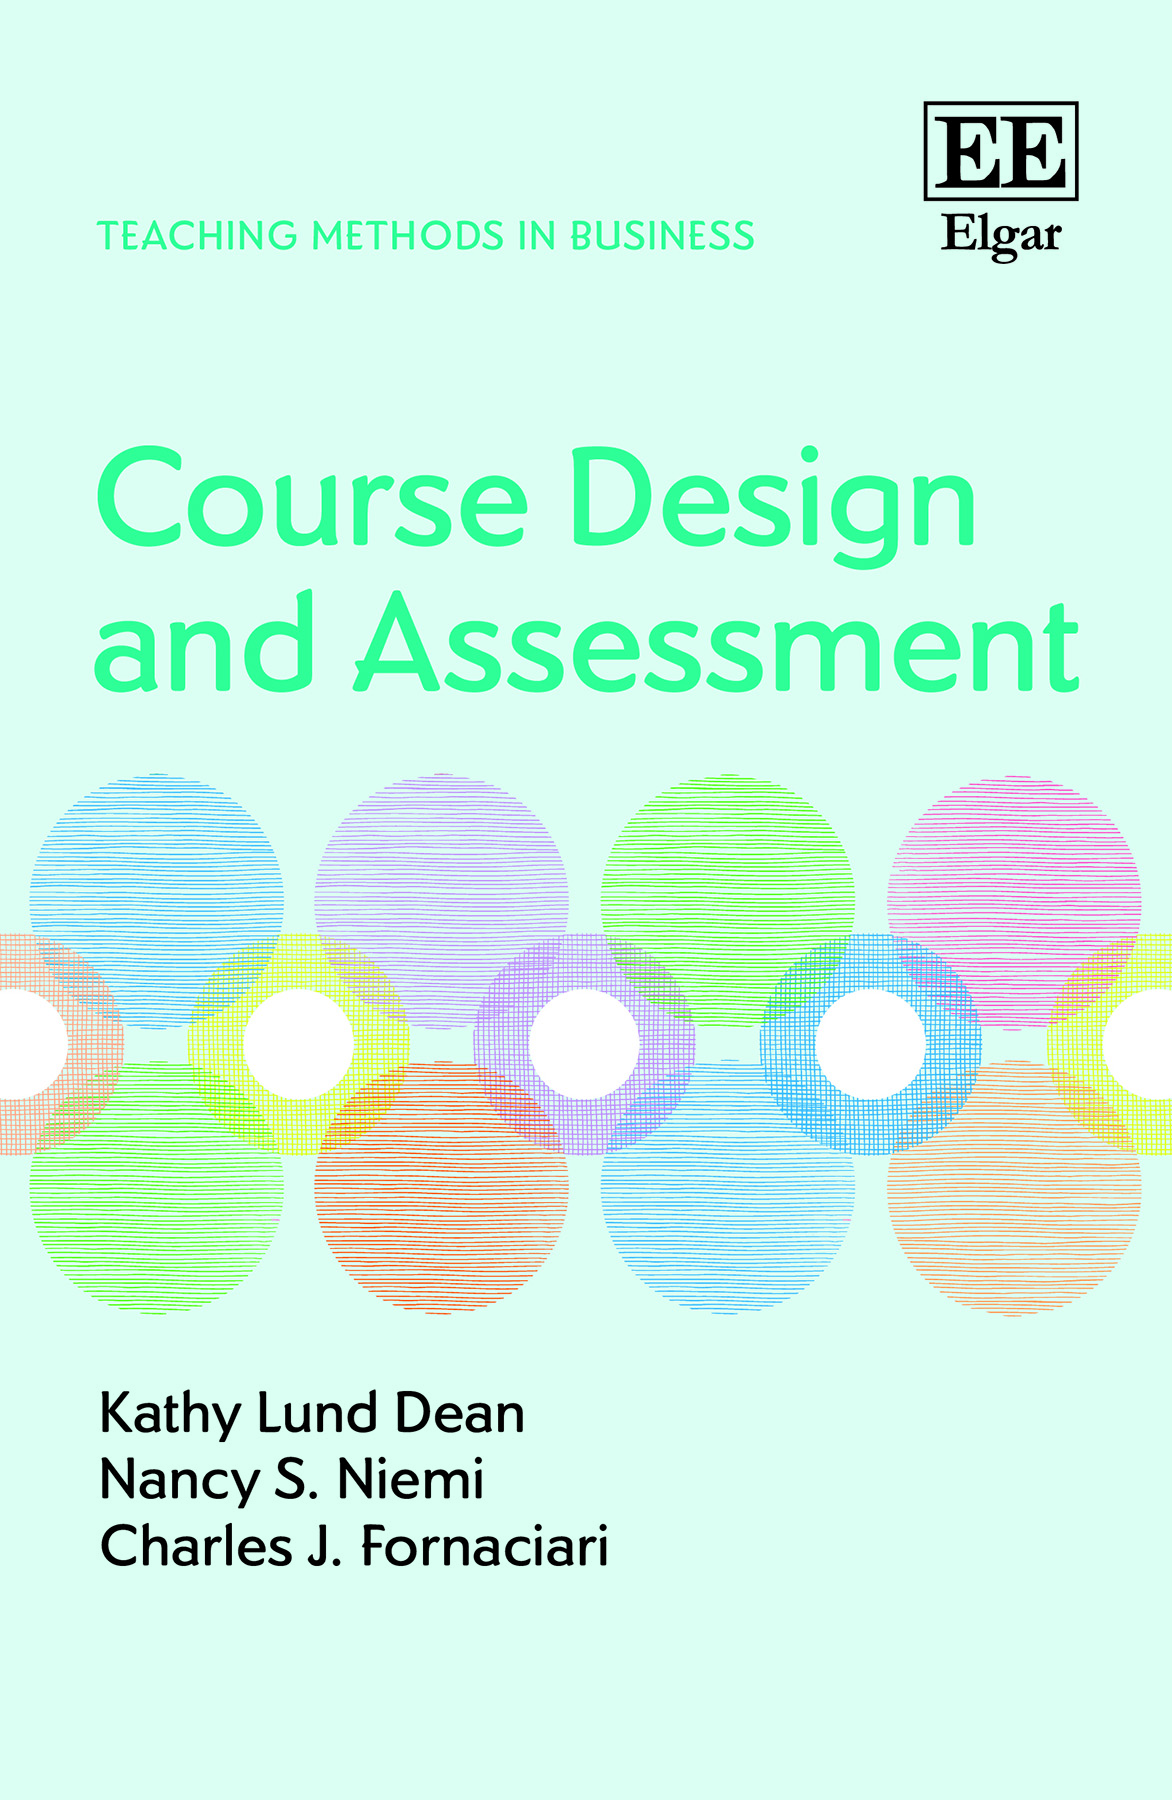 Course Design and Assessment